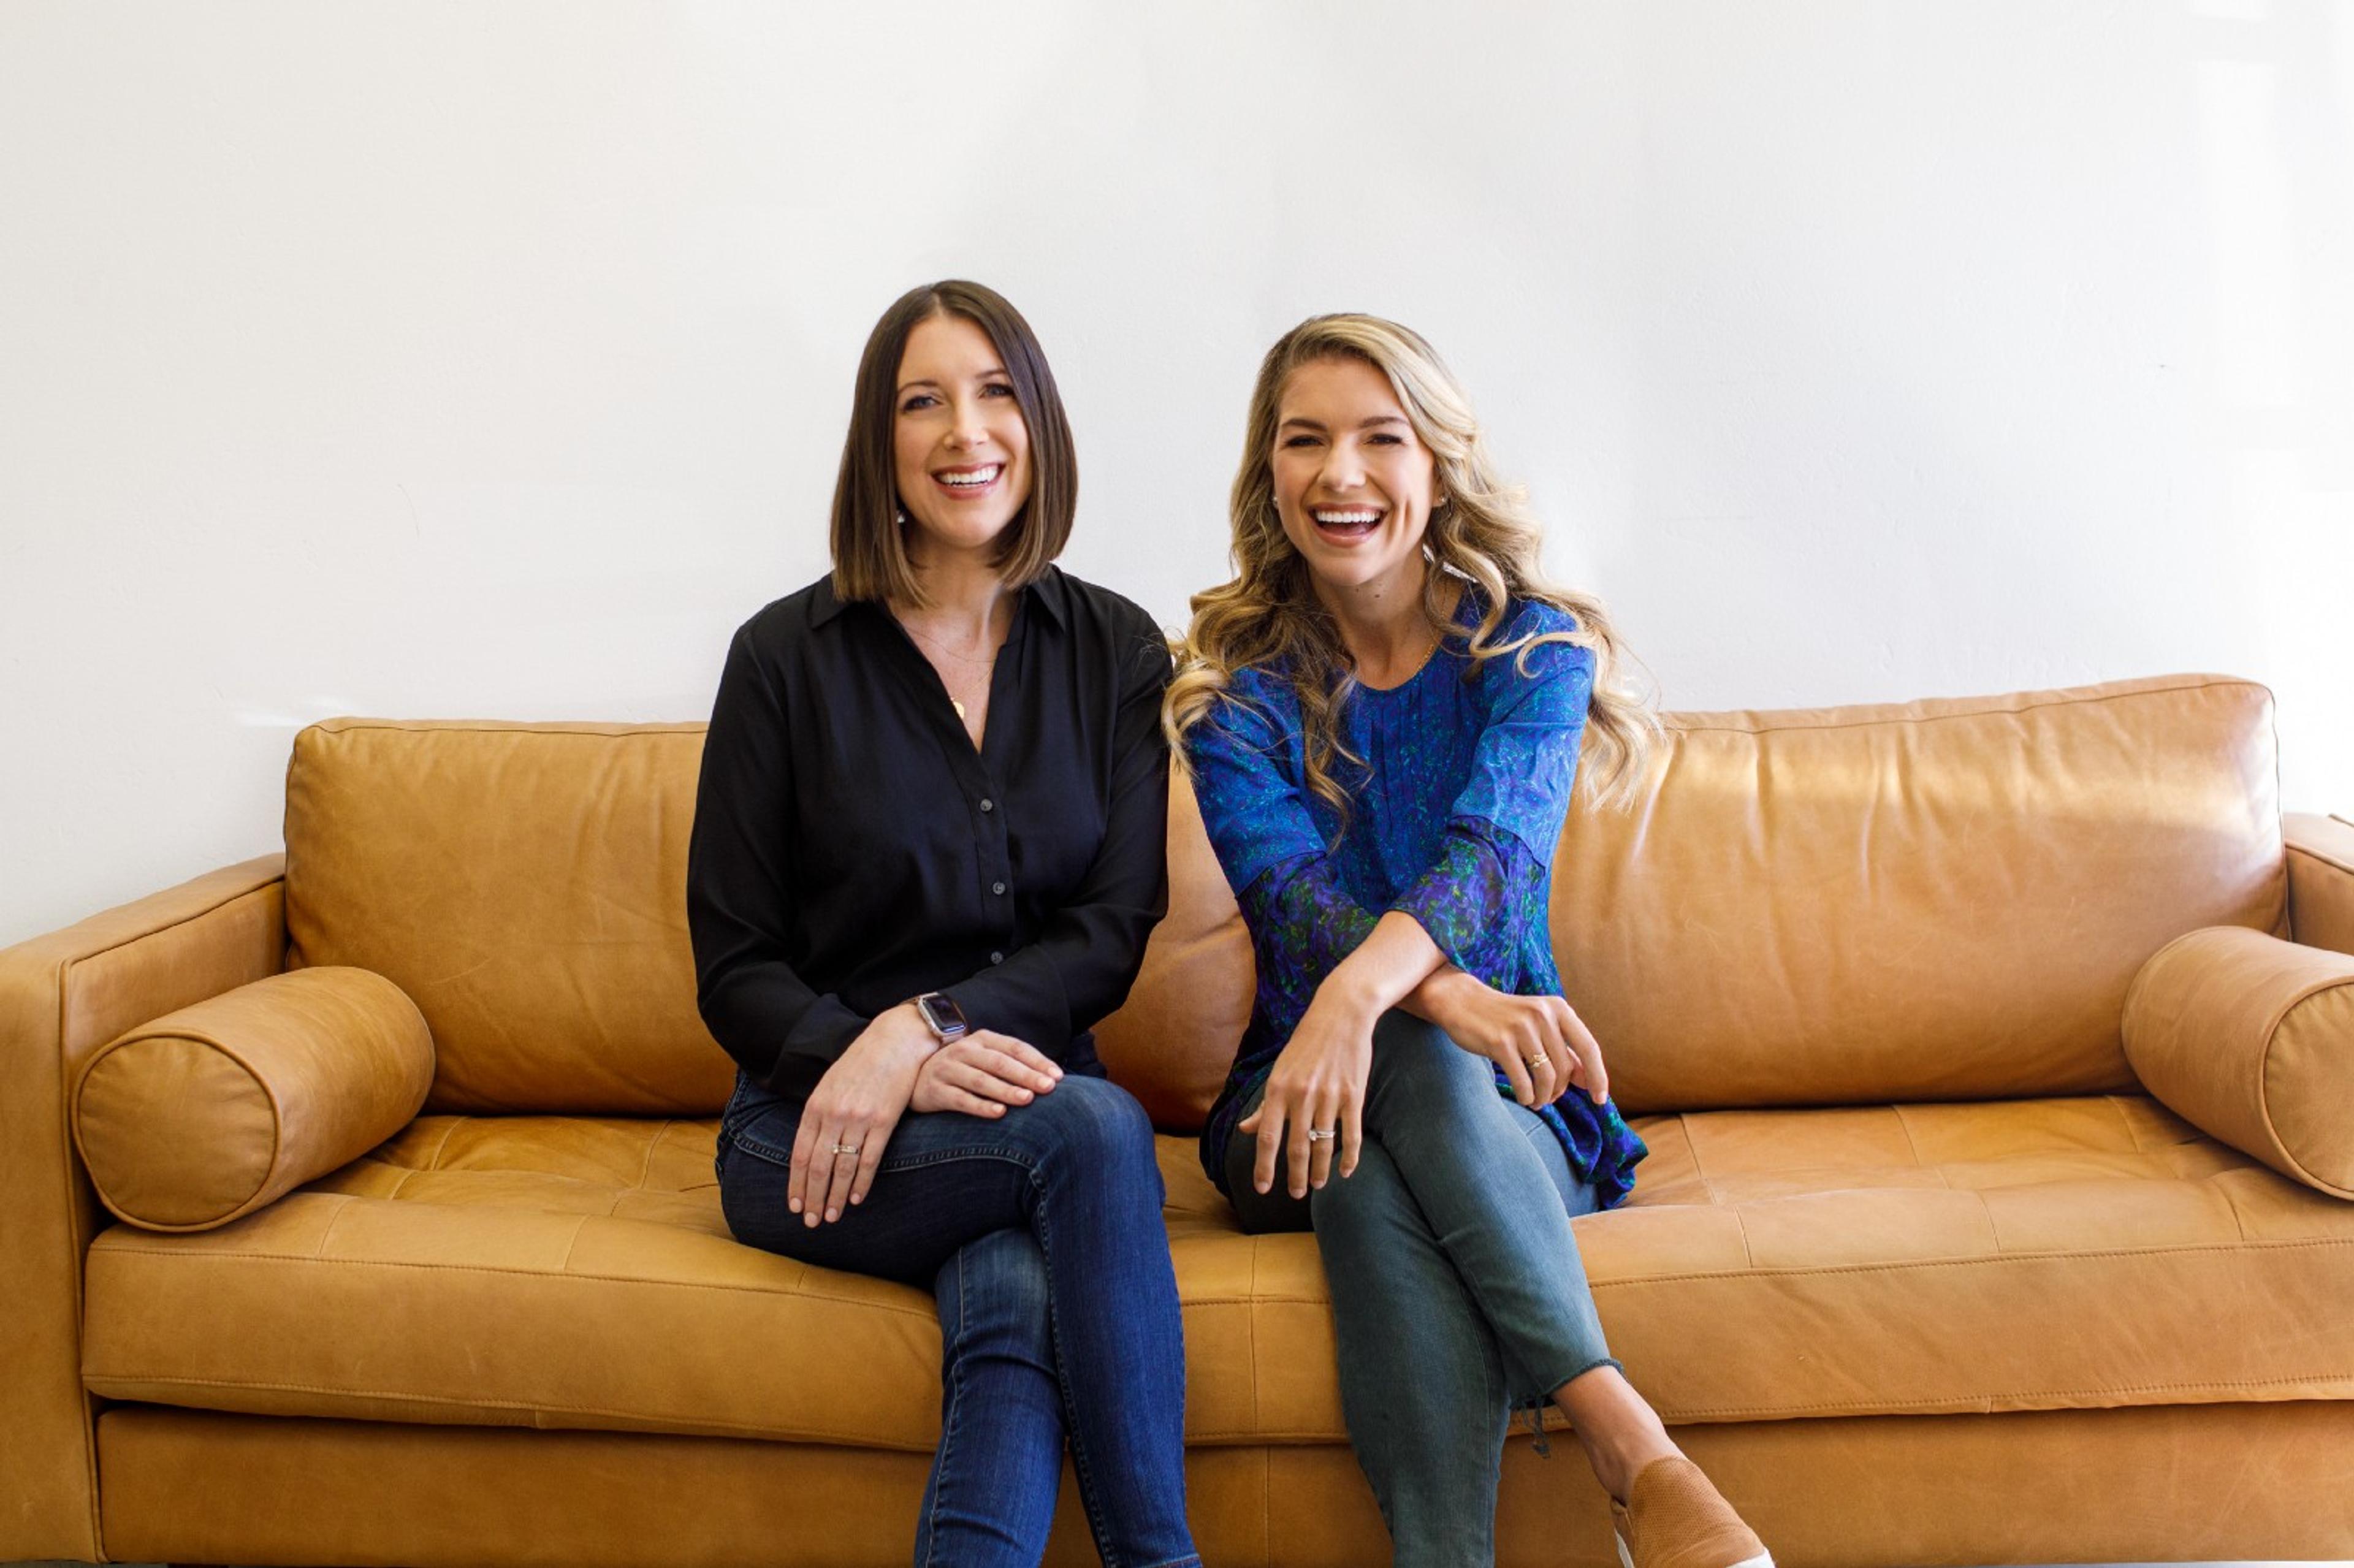 Equip founders Erin Parks and Kristina Saffran sit smiling on a beige couch